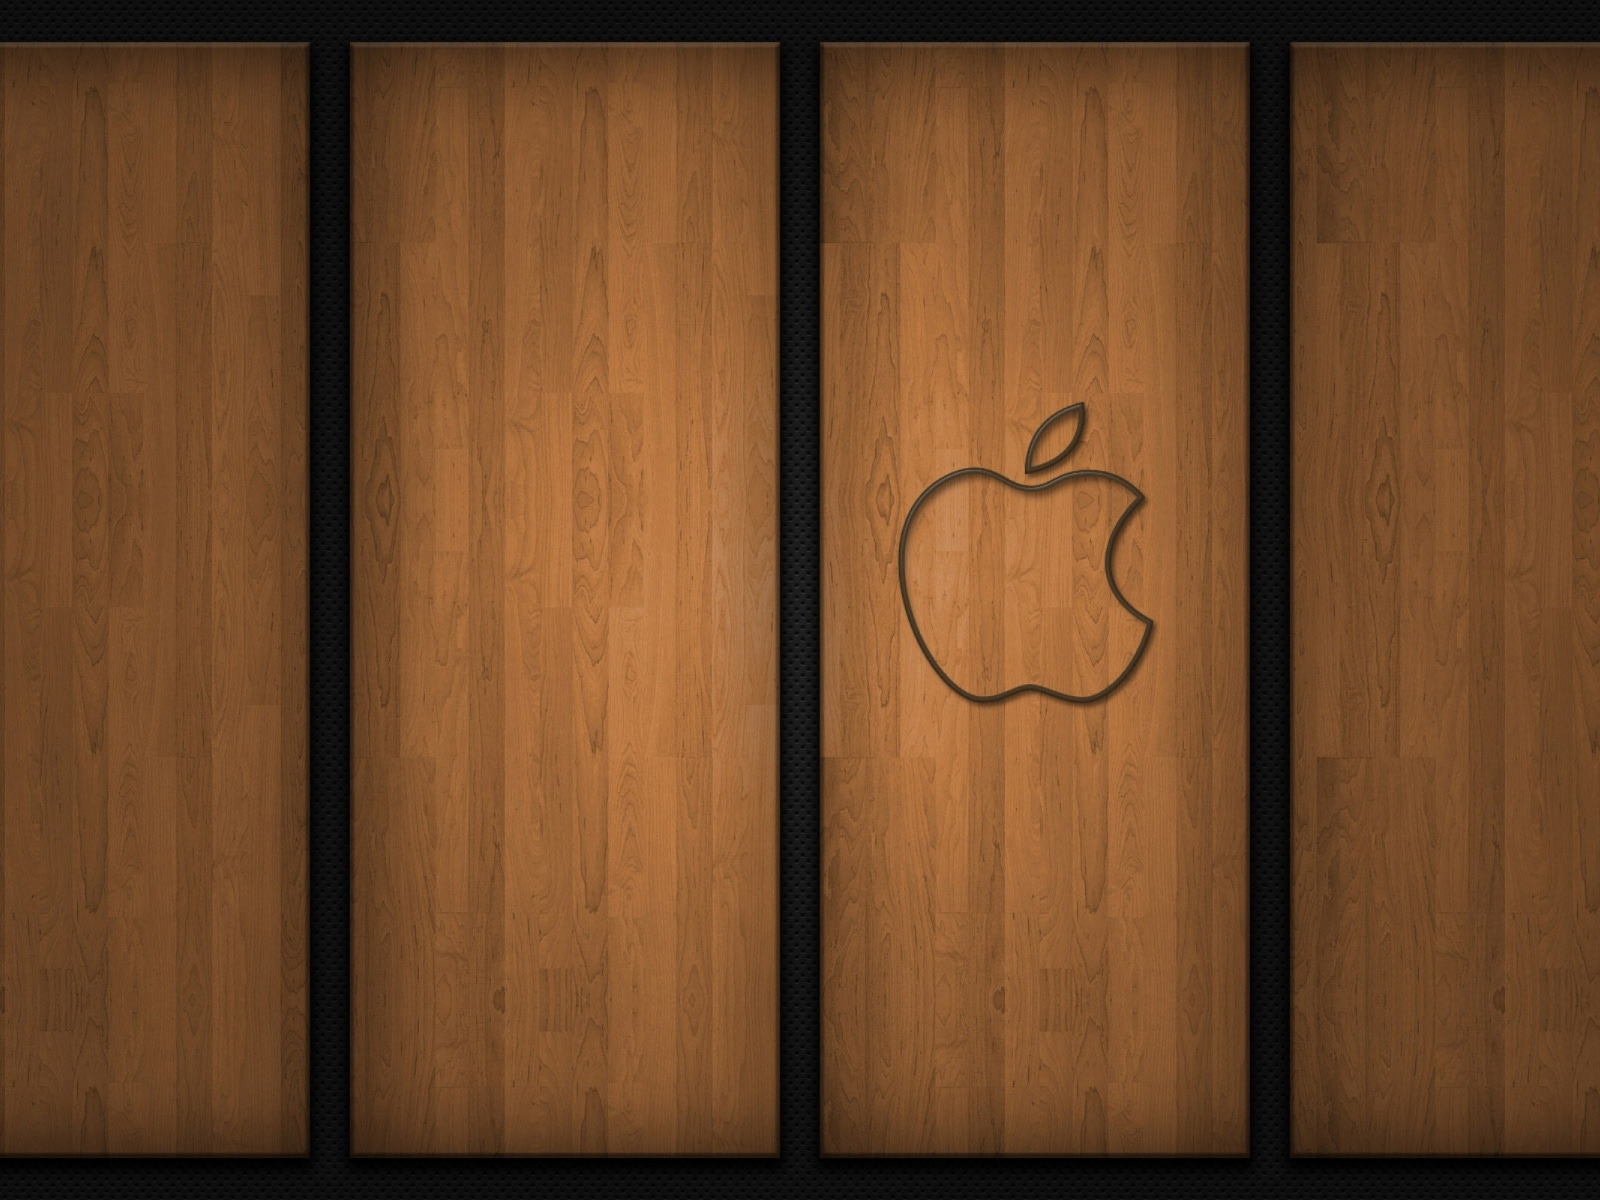 Apple logo on wood for 1600 x 1200 resolution